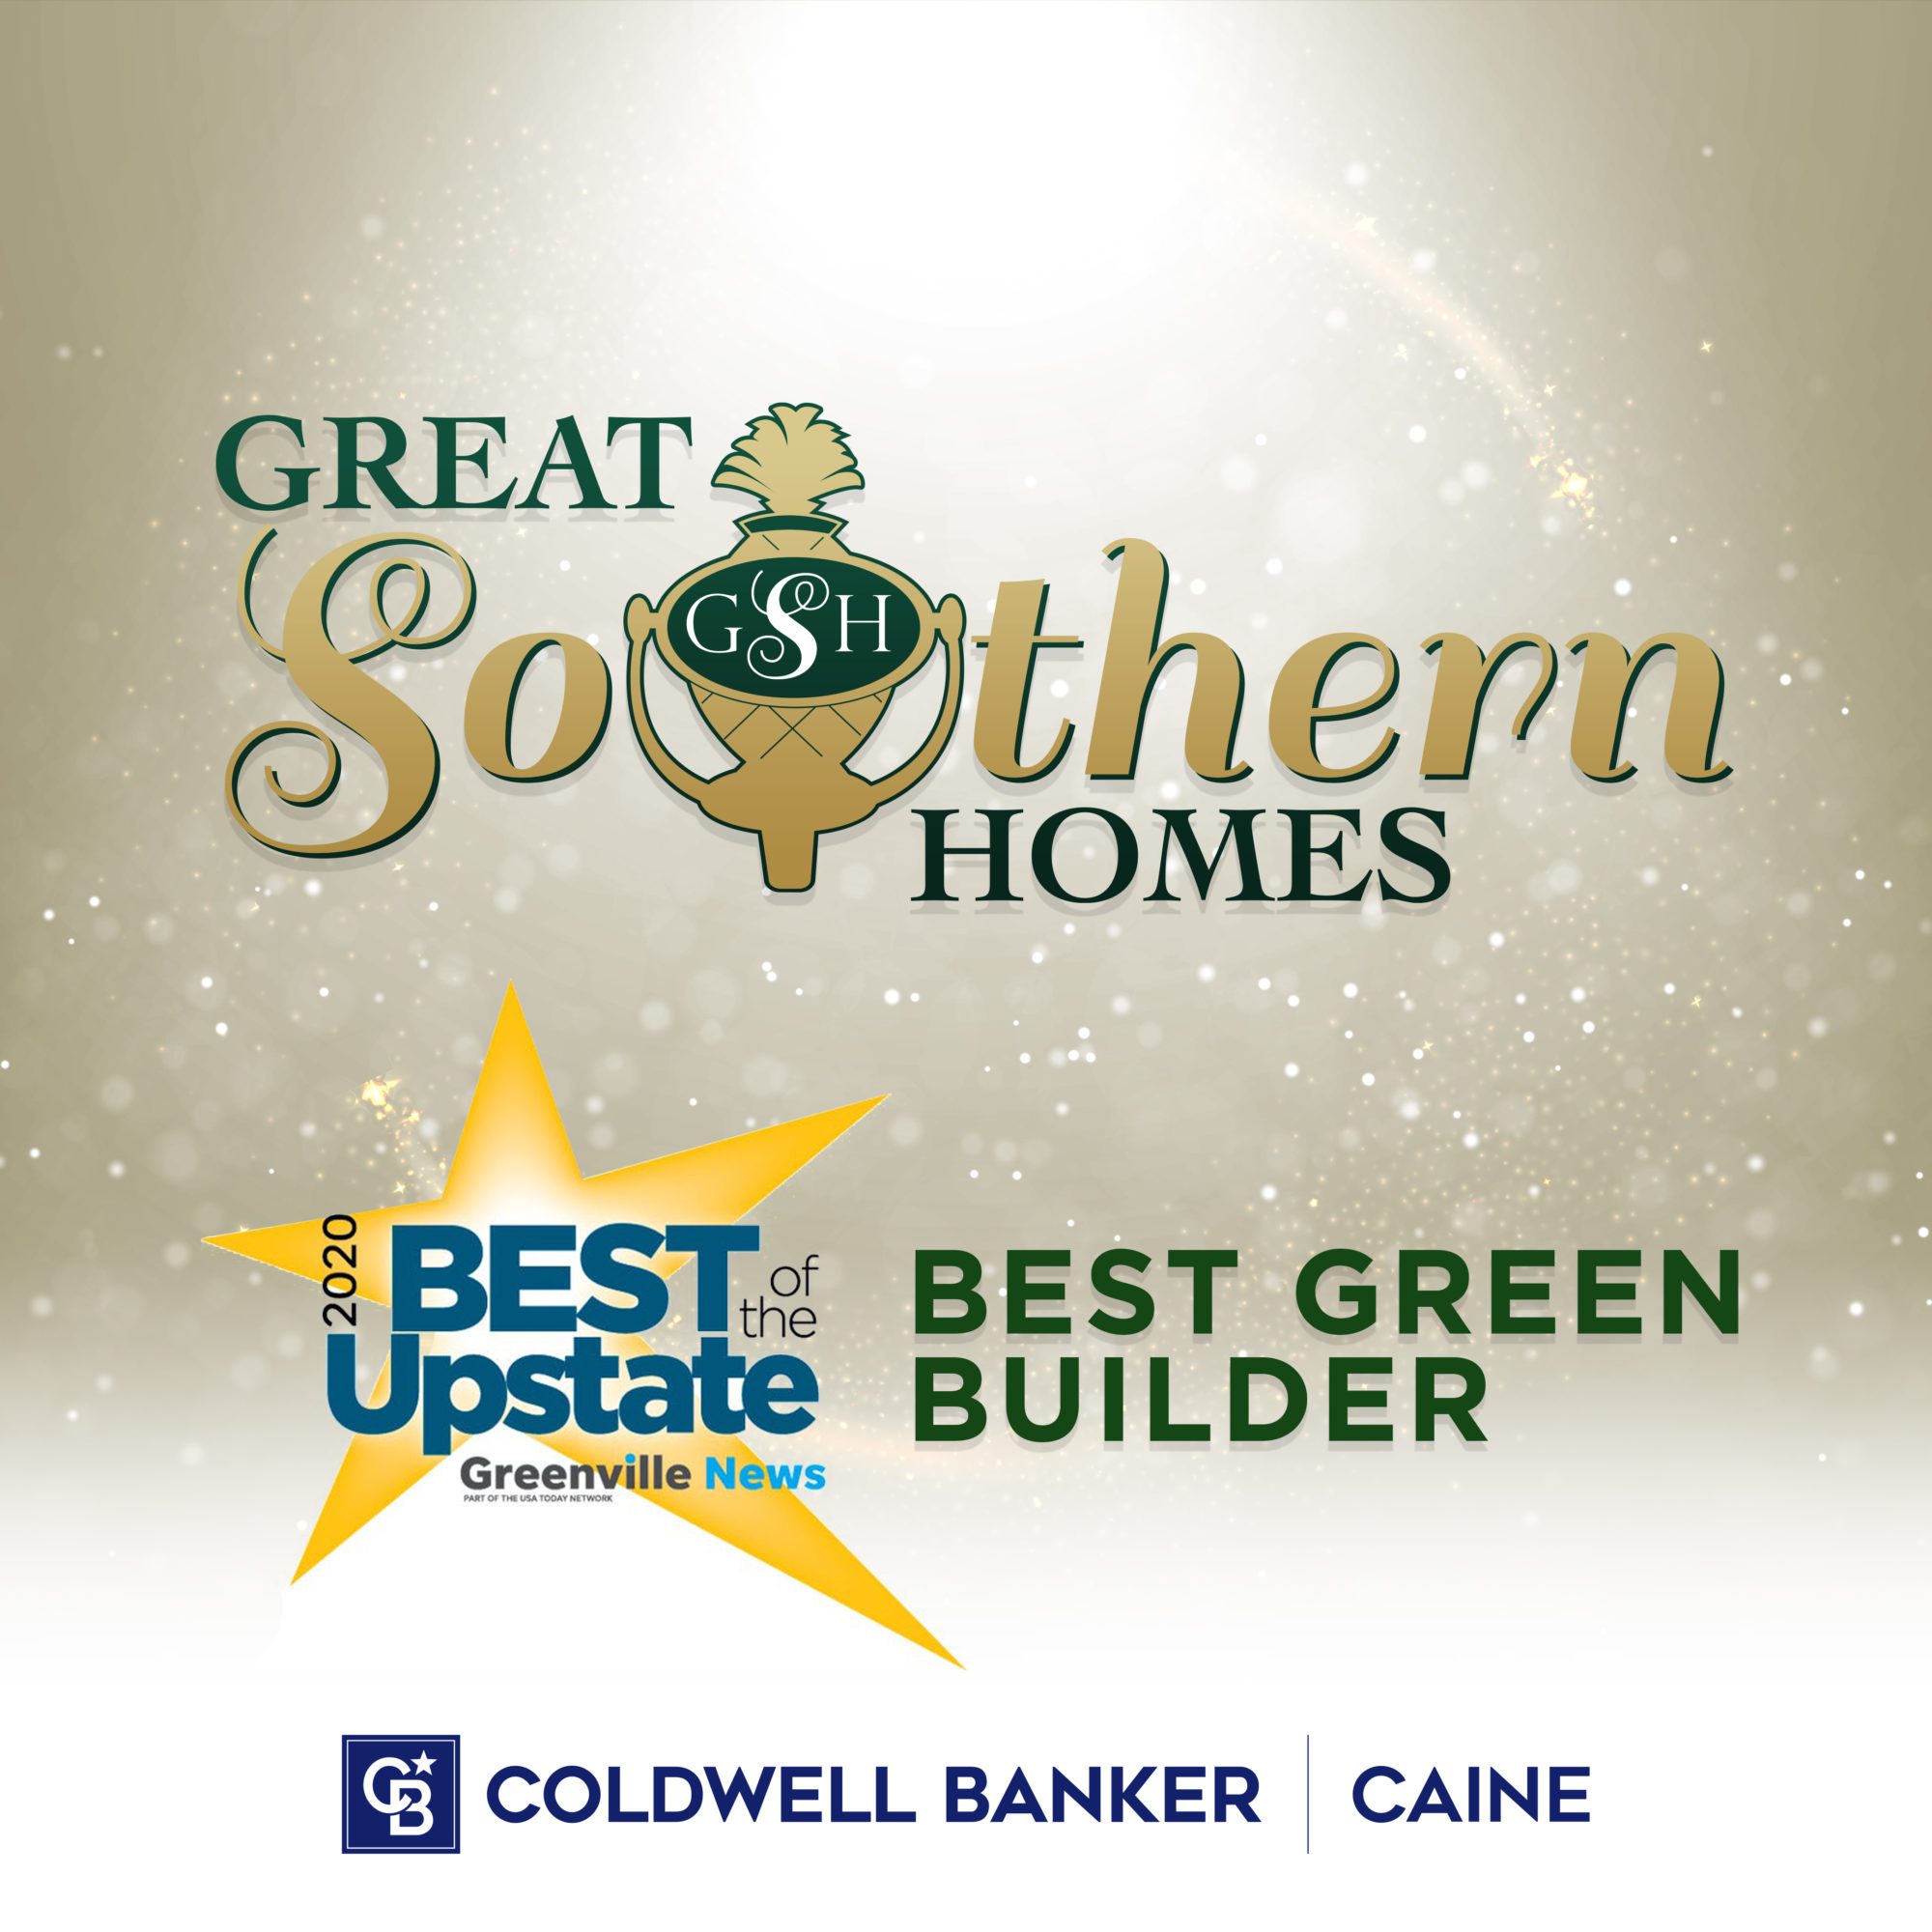 Great Southern Homes Named Best Green Builder by Greenville News Best of the Upstate Contest